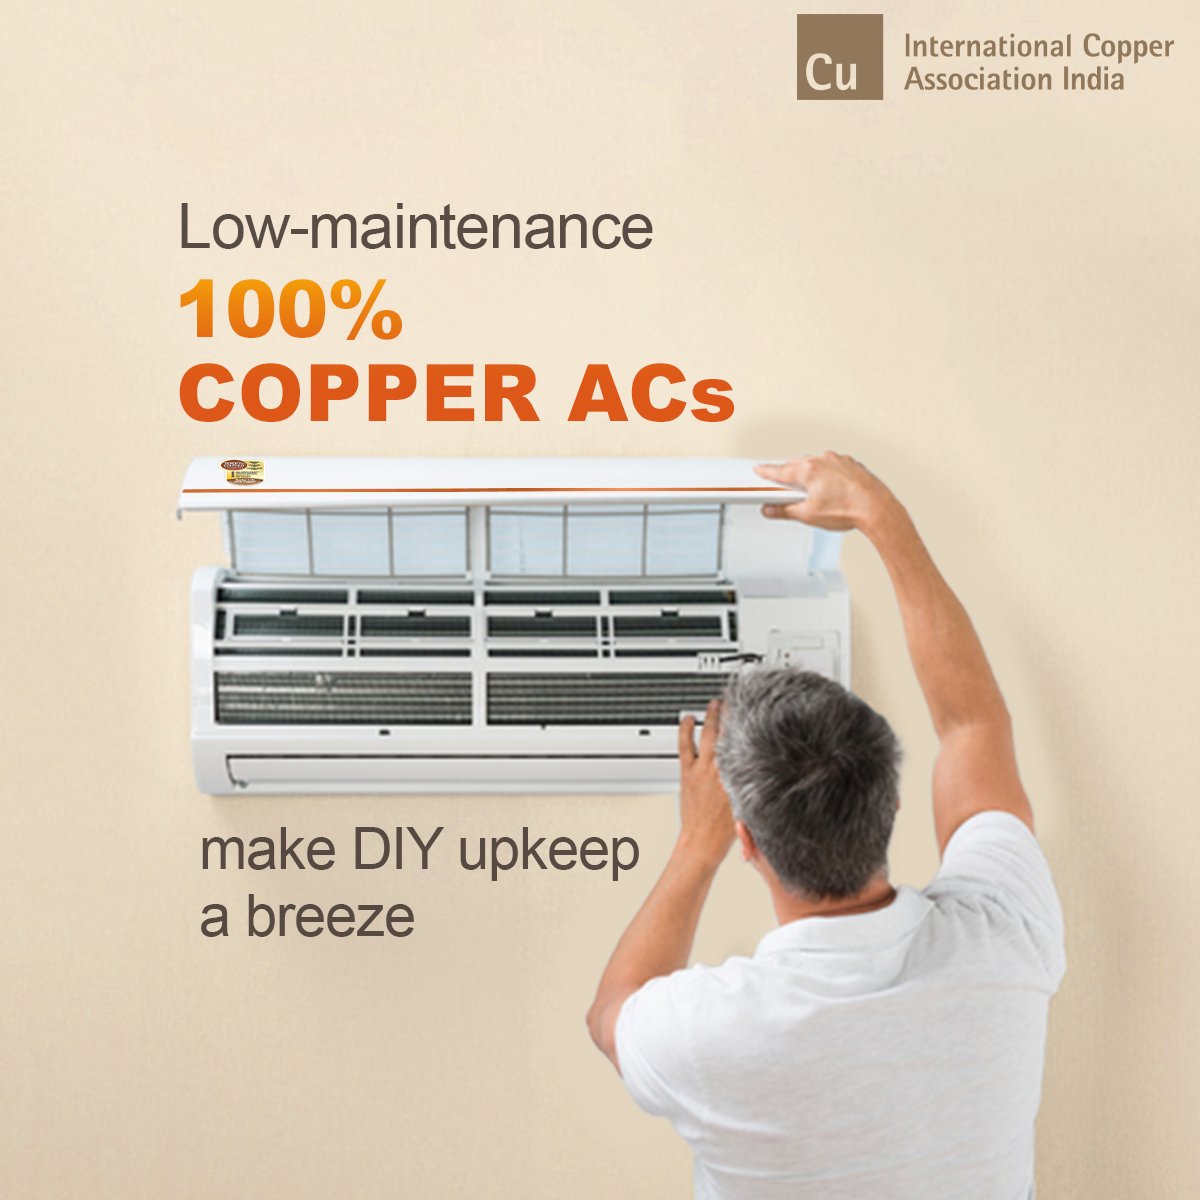 Did you know copper is much more durable than aluminium? This makes 100% Copper ACs less likely to need professional servicing or repair work – so you can take care of basic servicing.

#ICAIndia #EnergyEfficiency #Environment #EcoFriendly #LowMaintenance #Copper #CopperAC